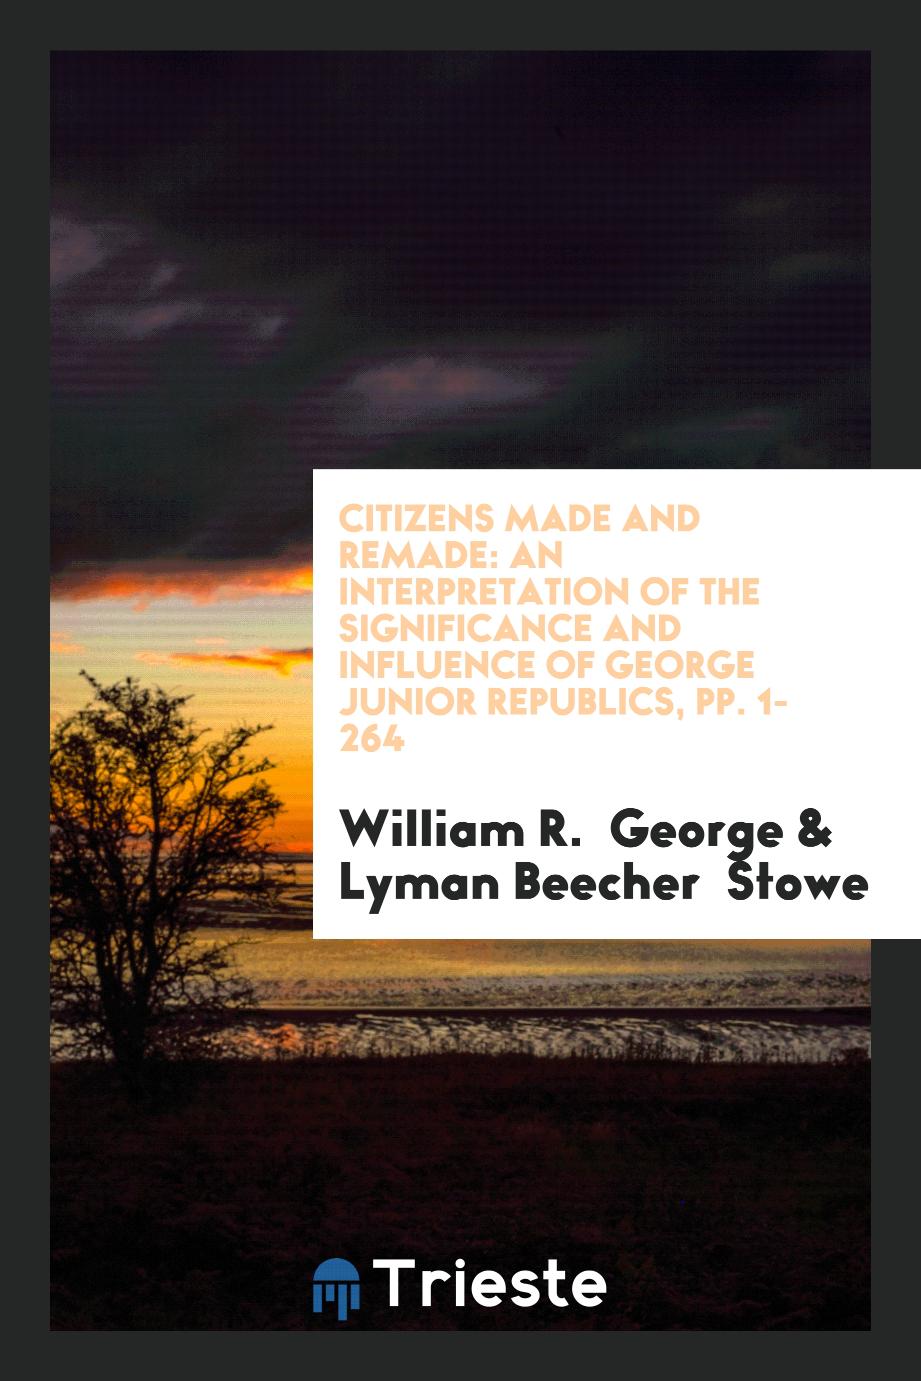 William R.  George, Lyman Beecher  Stowe - Citizens Made and Remade: An Interpretation of the Significance and Influence of George Junior Republics, pp. 1-264